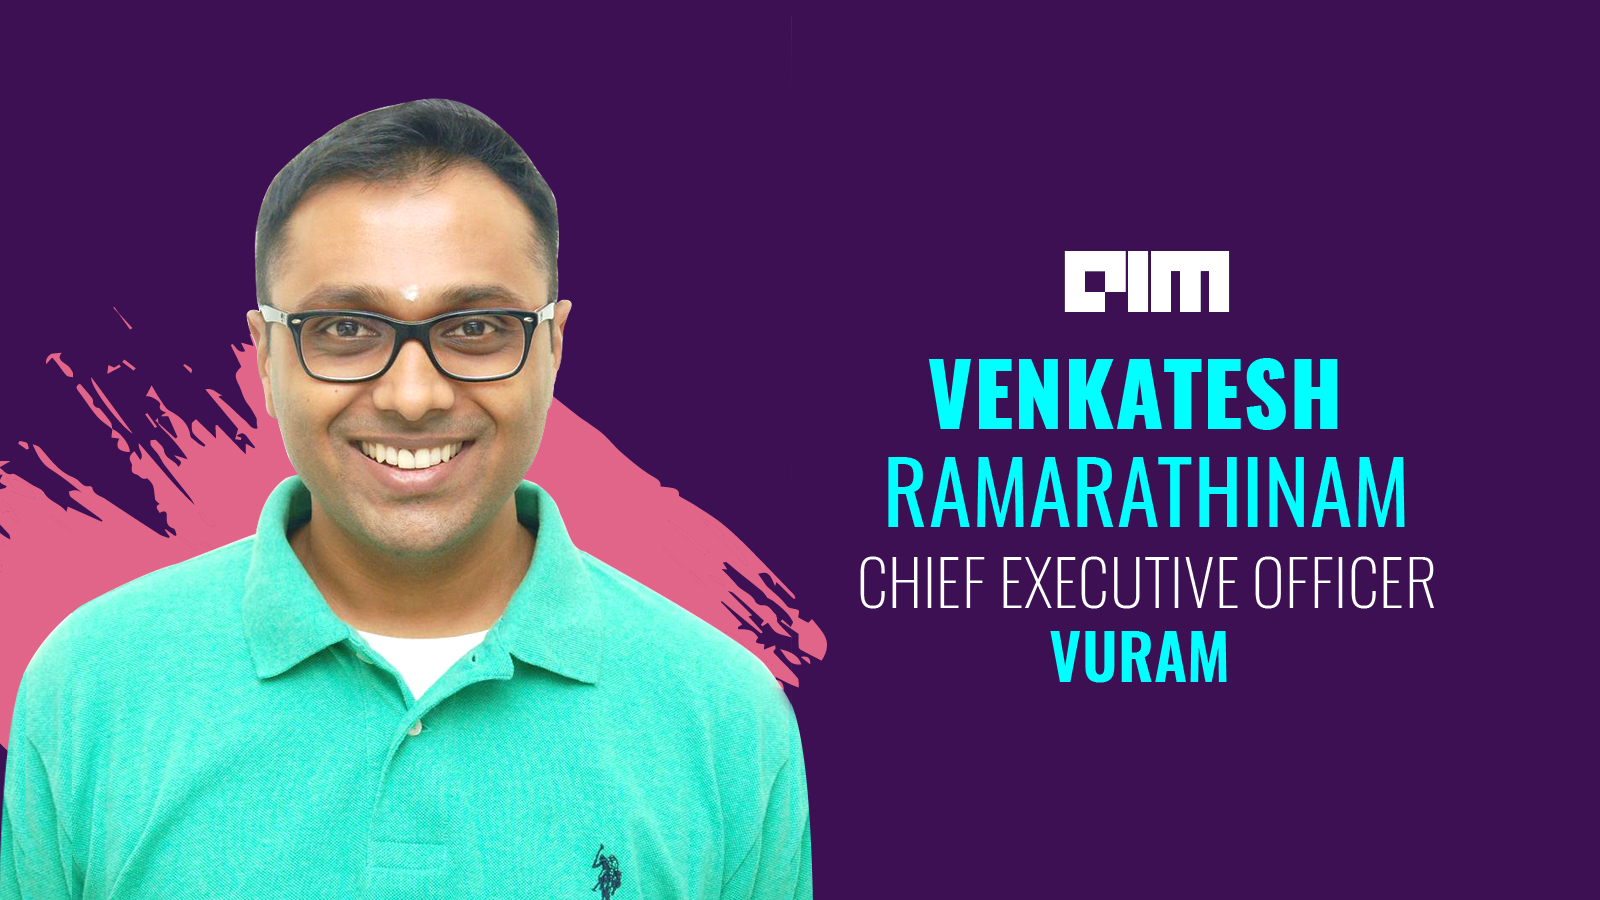 Low-Code Development Lowers The Barrier To Entry — The Need Of The Hour, Says Venkatesh Ramarathinam, CEO, Vuram